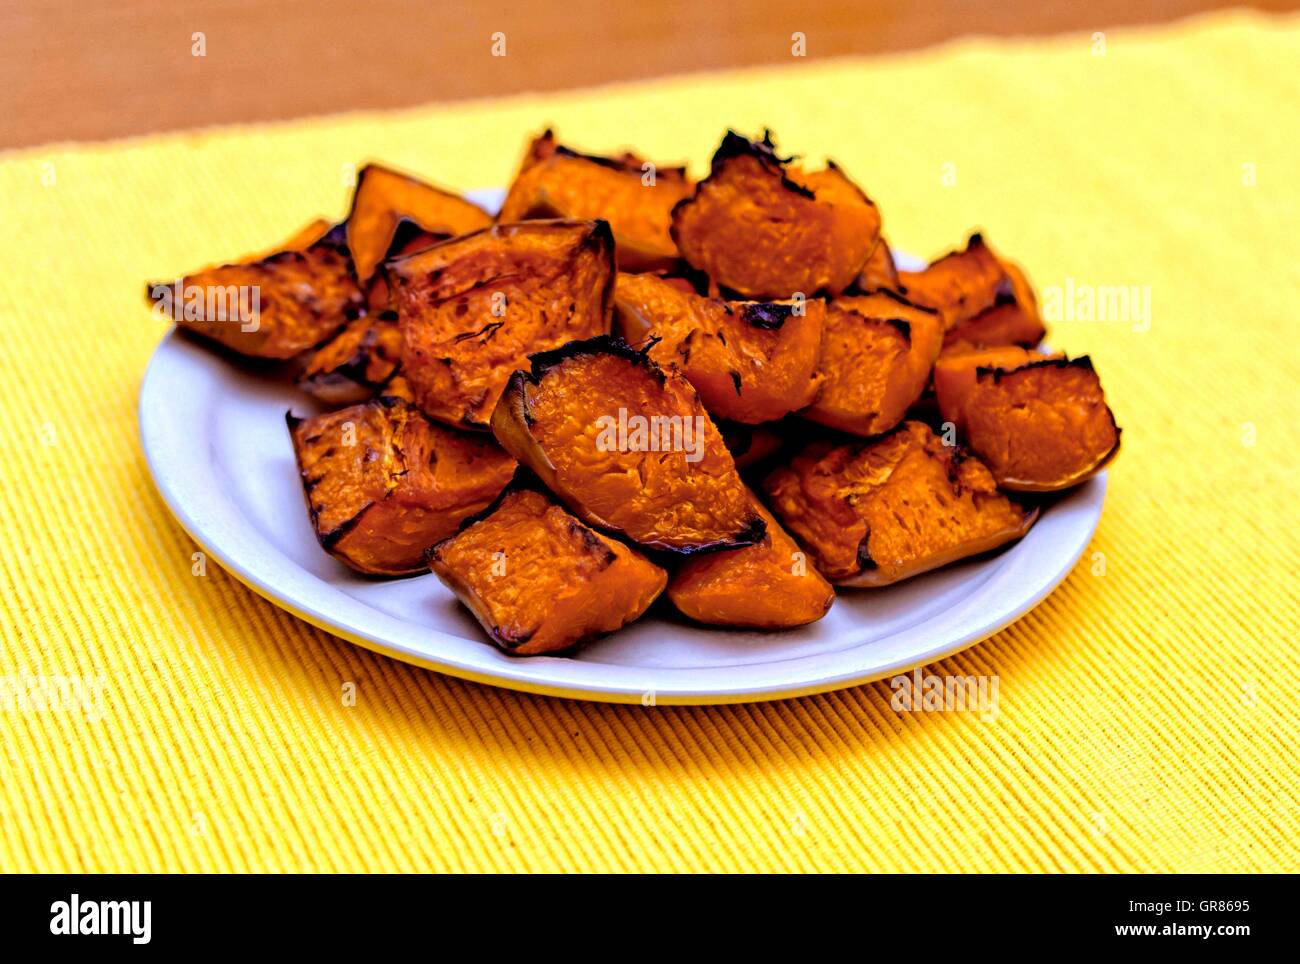 Birnenkuerbis, Cucurbita Moschata Butternut , Baked Crispy Without Ingredients In The Tube, Hungarian Specialty Stock Photo